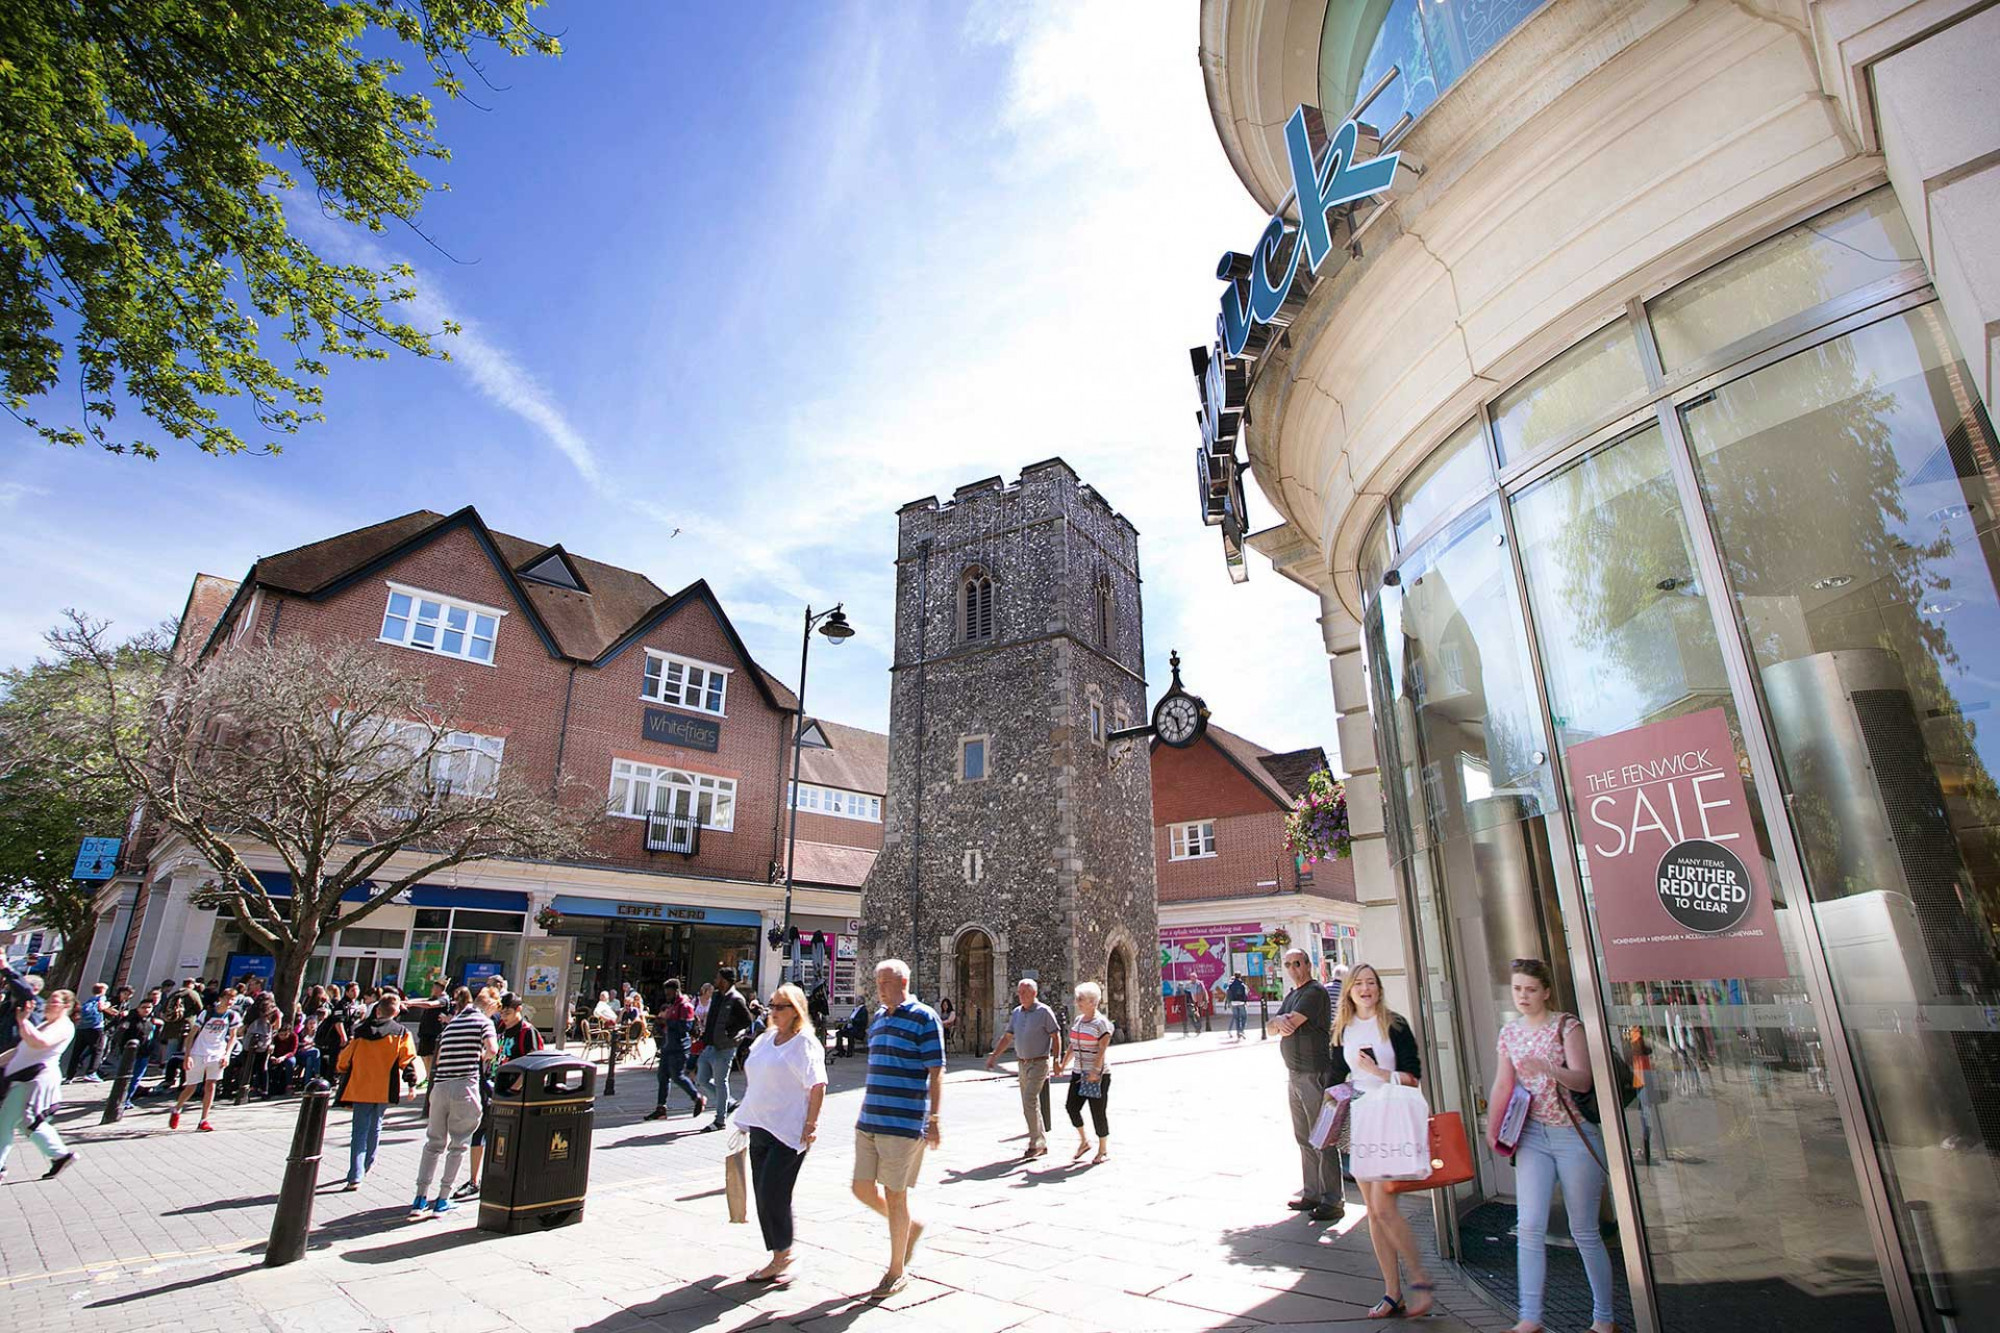 People walking along the busy Canterbury high street past the historical clock tower